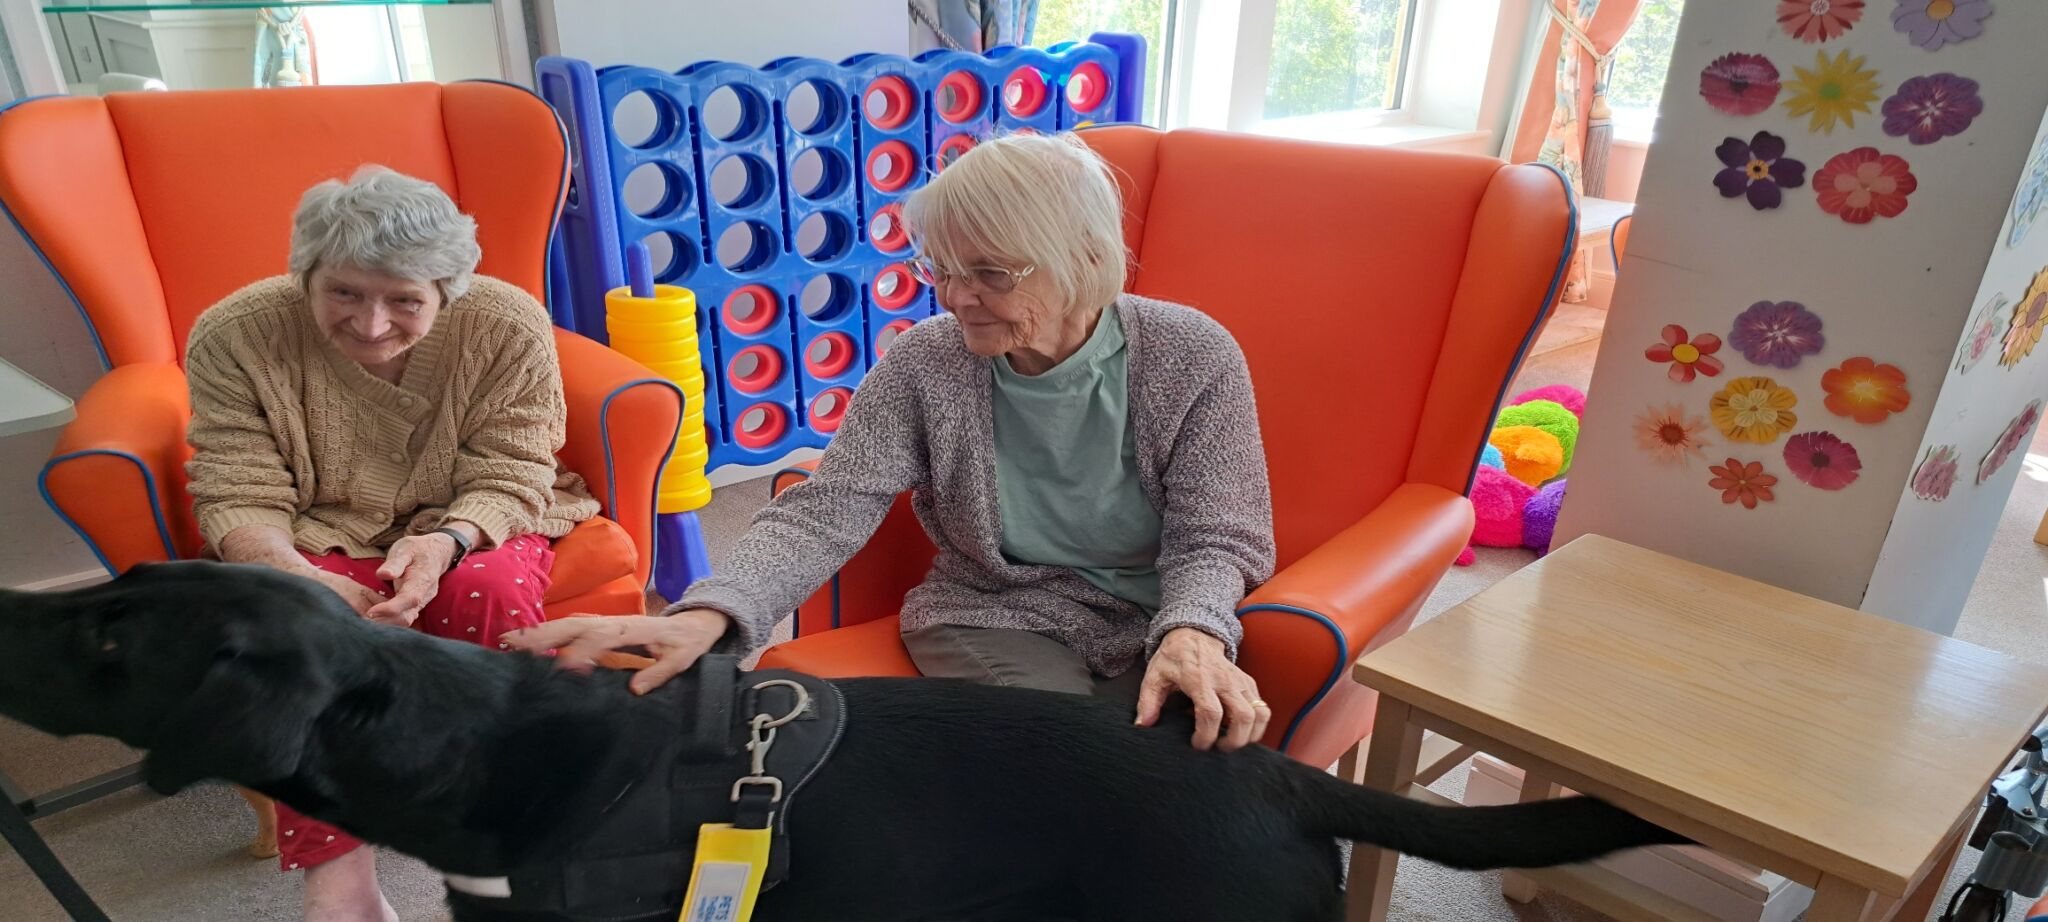 Hutton Manor Care Home was filled with joy and the sound of delighted cheers as therapy dog Arthur, accompanied by his owner Emma, made his much-anticipated return visit.